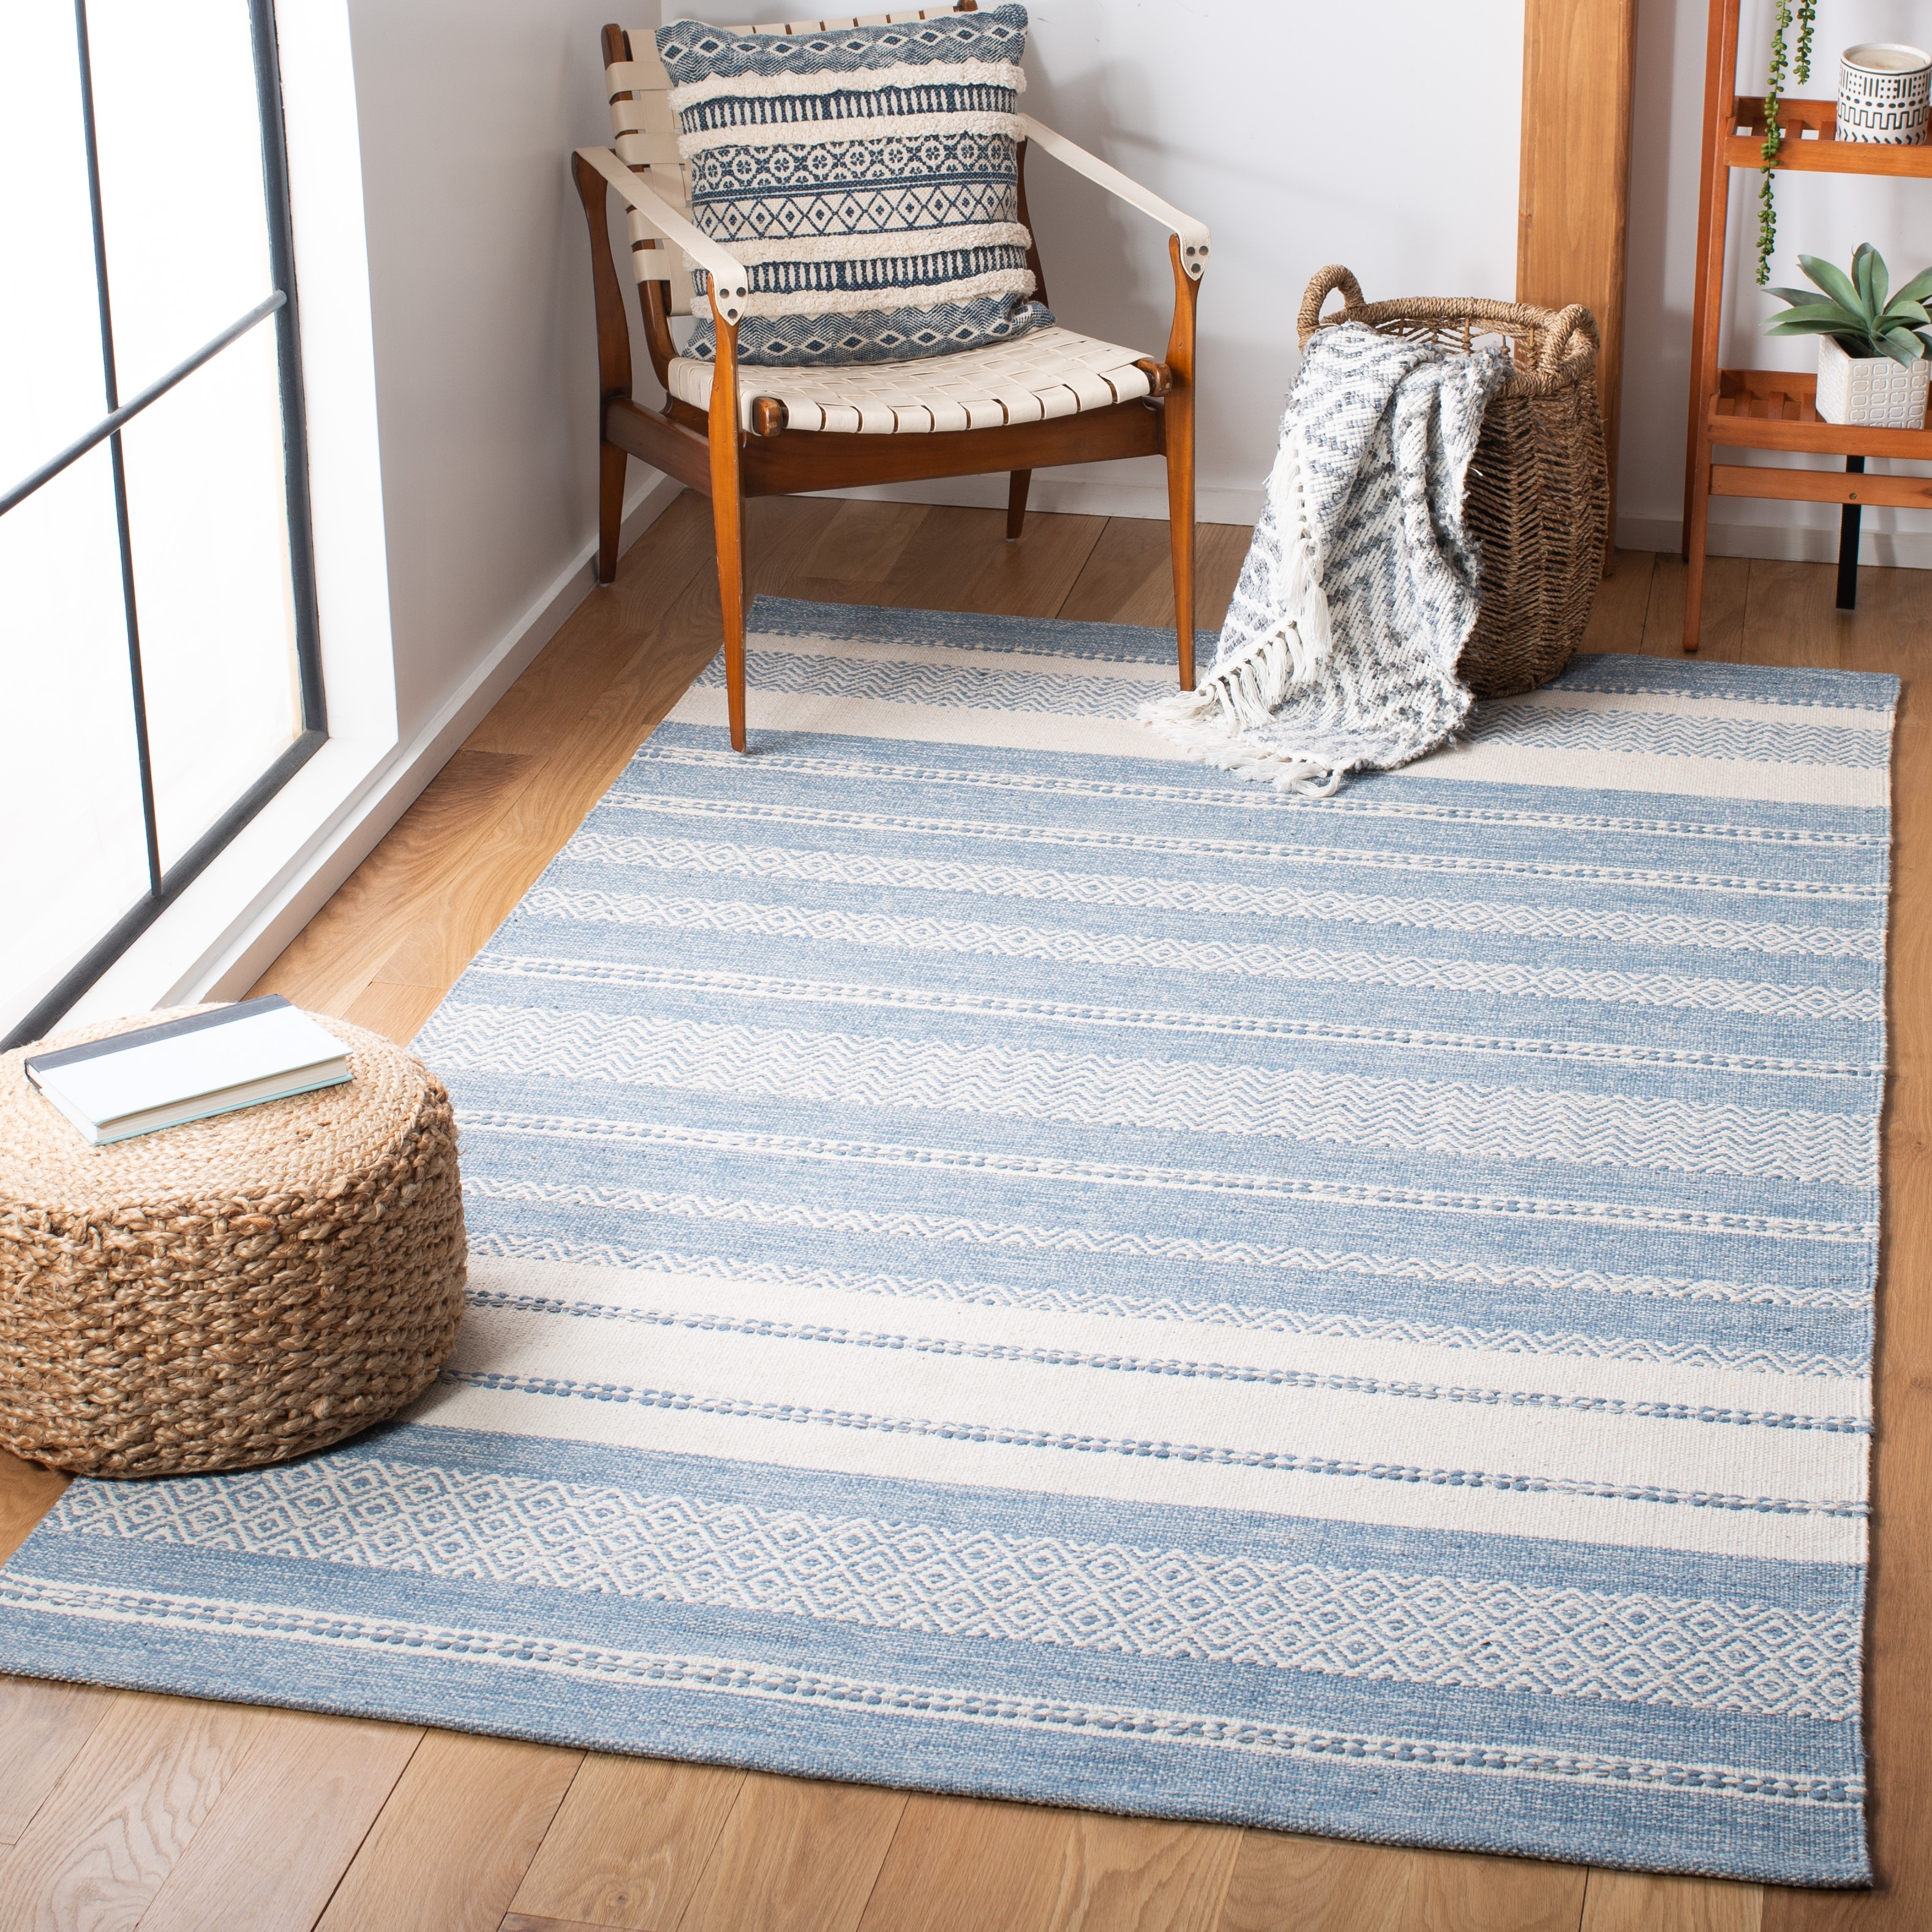 https://ak1.ostkcdn.com/images/products/is/images/direct/789cf614d6b36f37f42b6bc61e3d35a52d4be77f/SAFAVIEH-Handmade-Striped-Kilim-Voula-Modern-Cotton-Rug---5%27-x-8%27.jpg